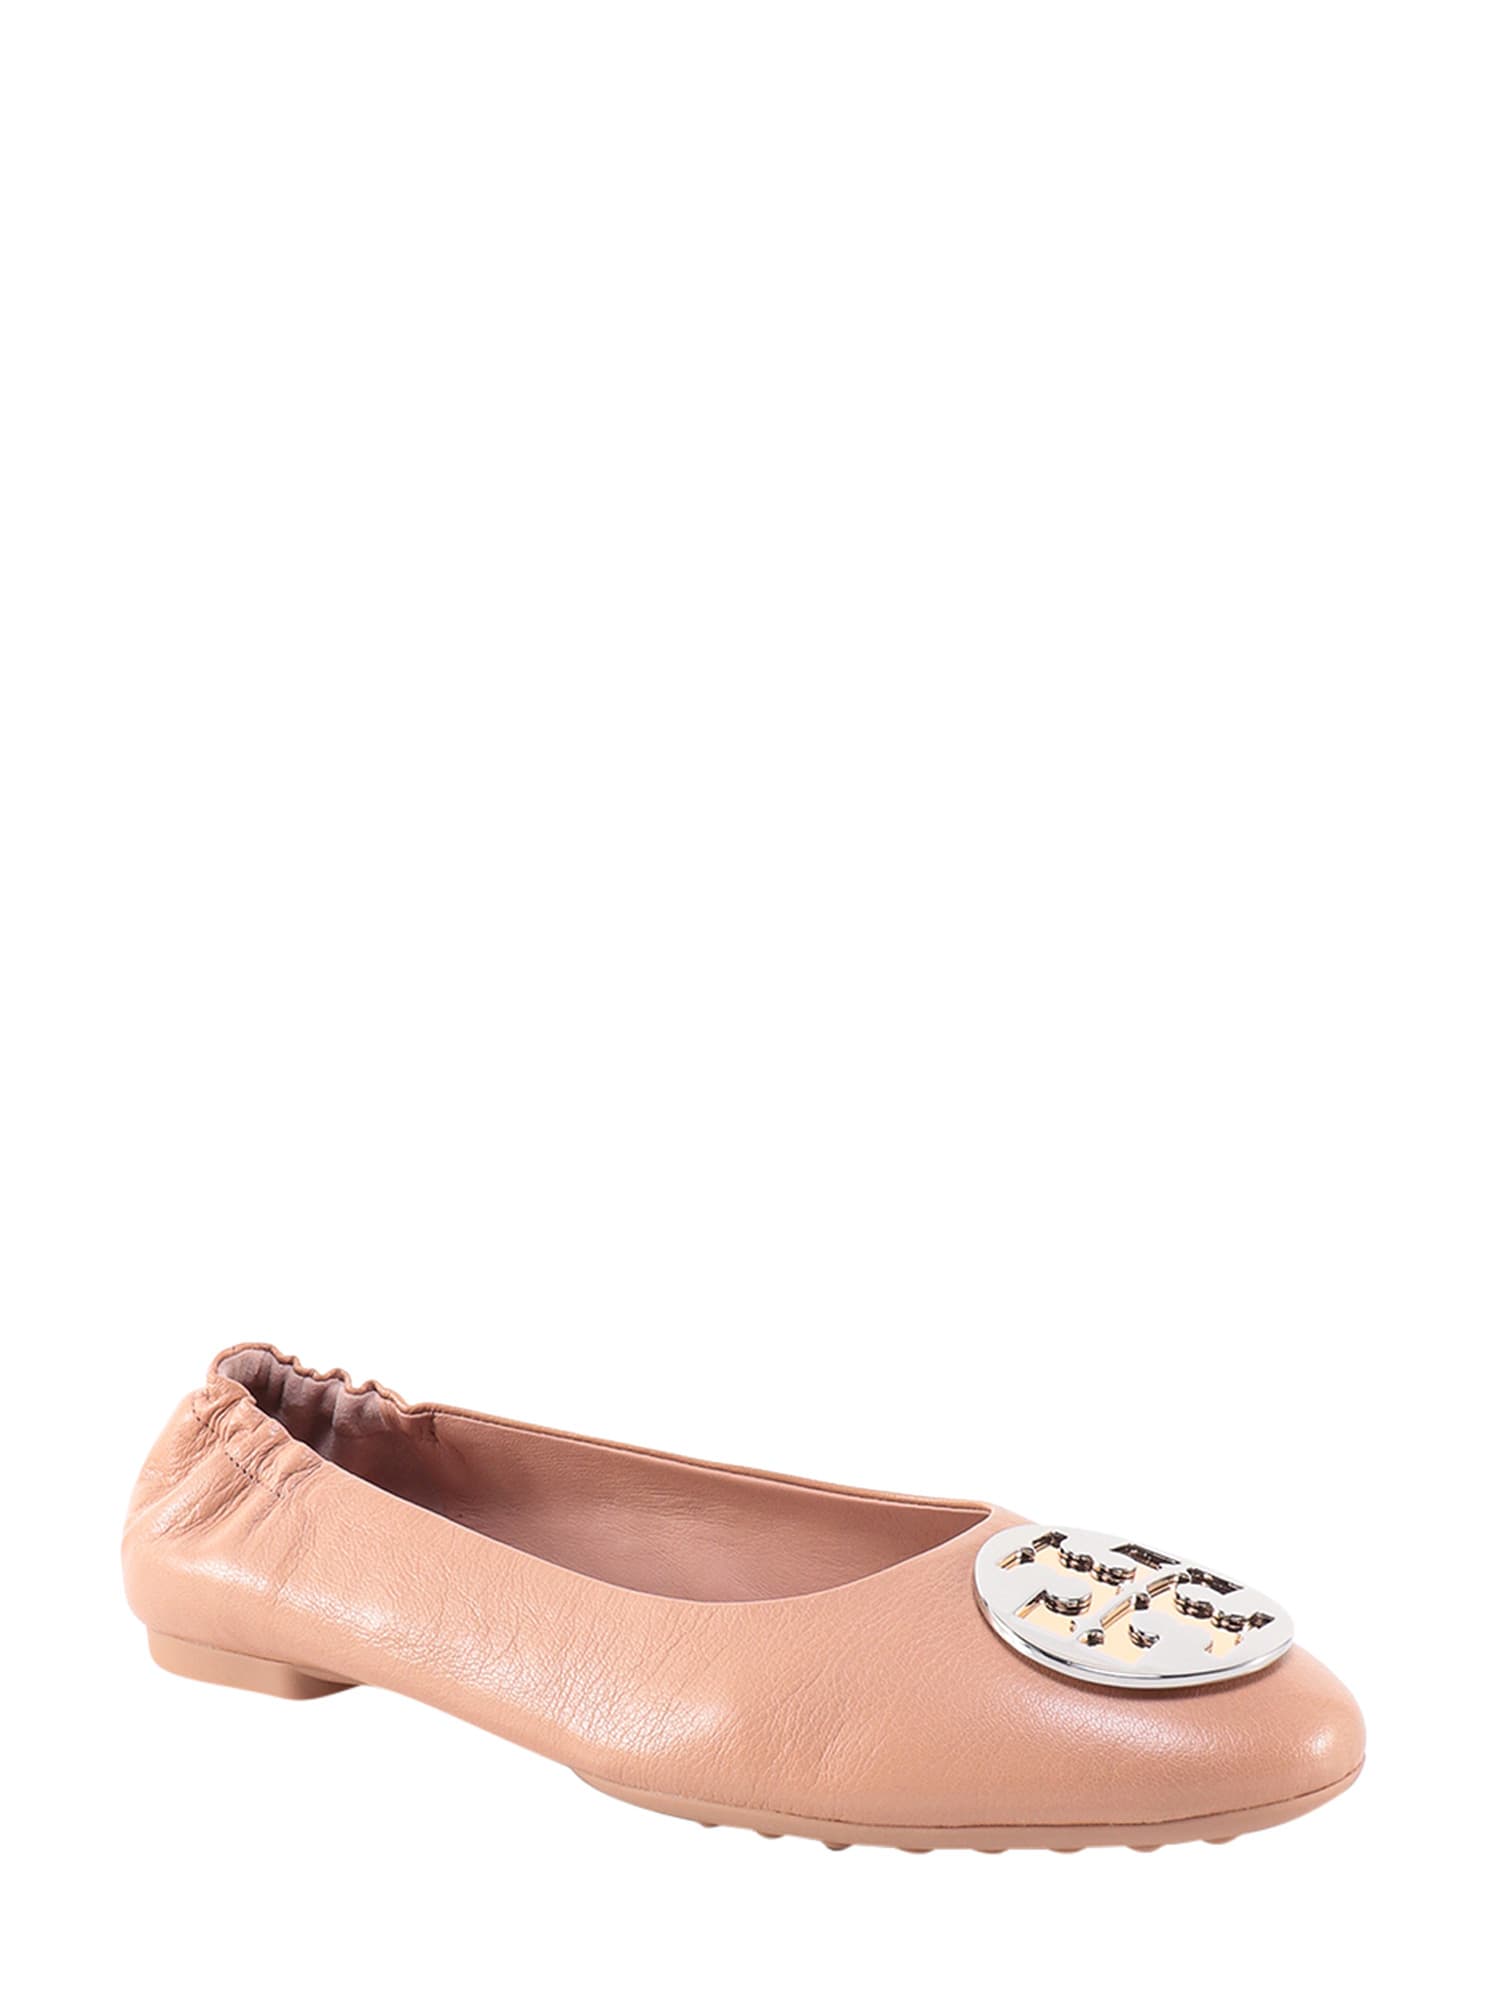 Shop Tory Burch Ballerinas Flat Shoes In Sand